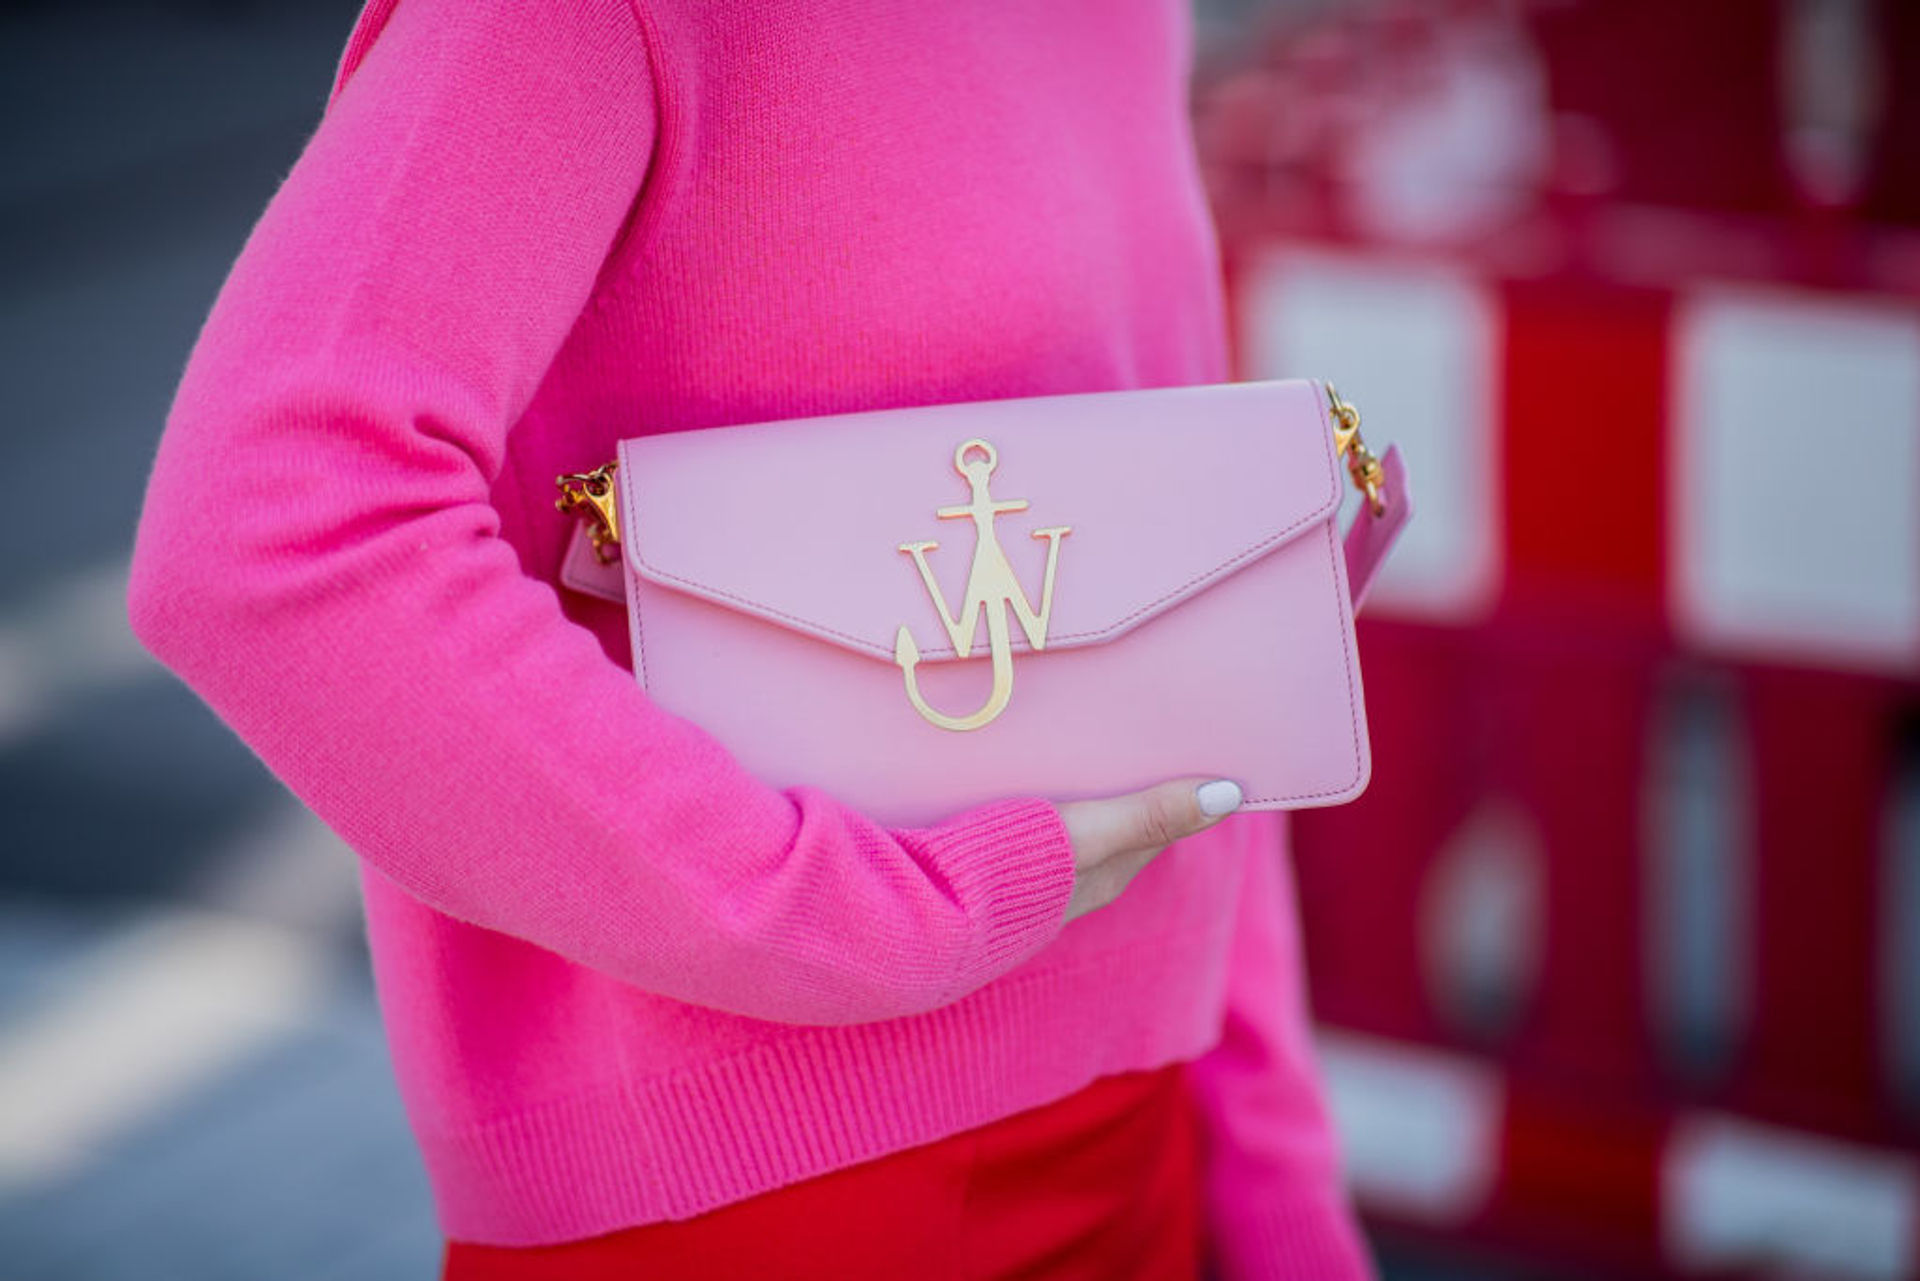 JW Anderson bags that every fashion aficionado should know about